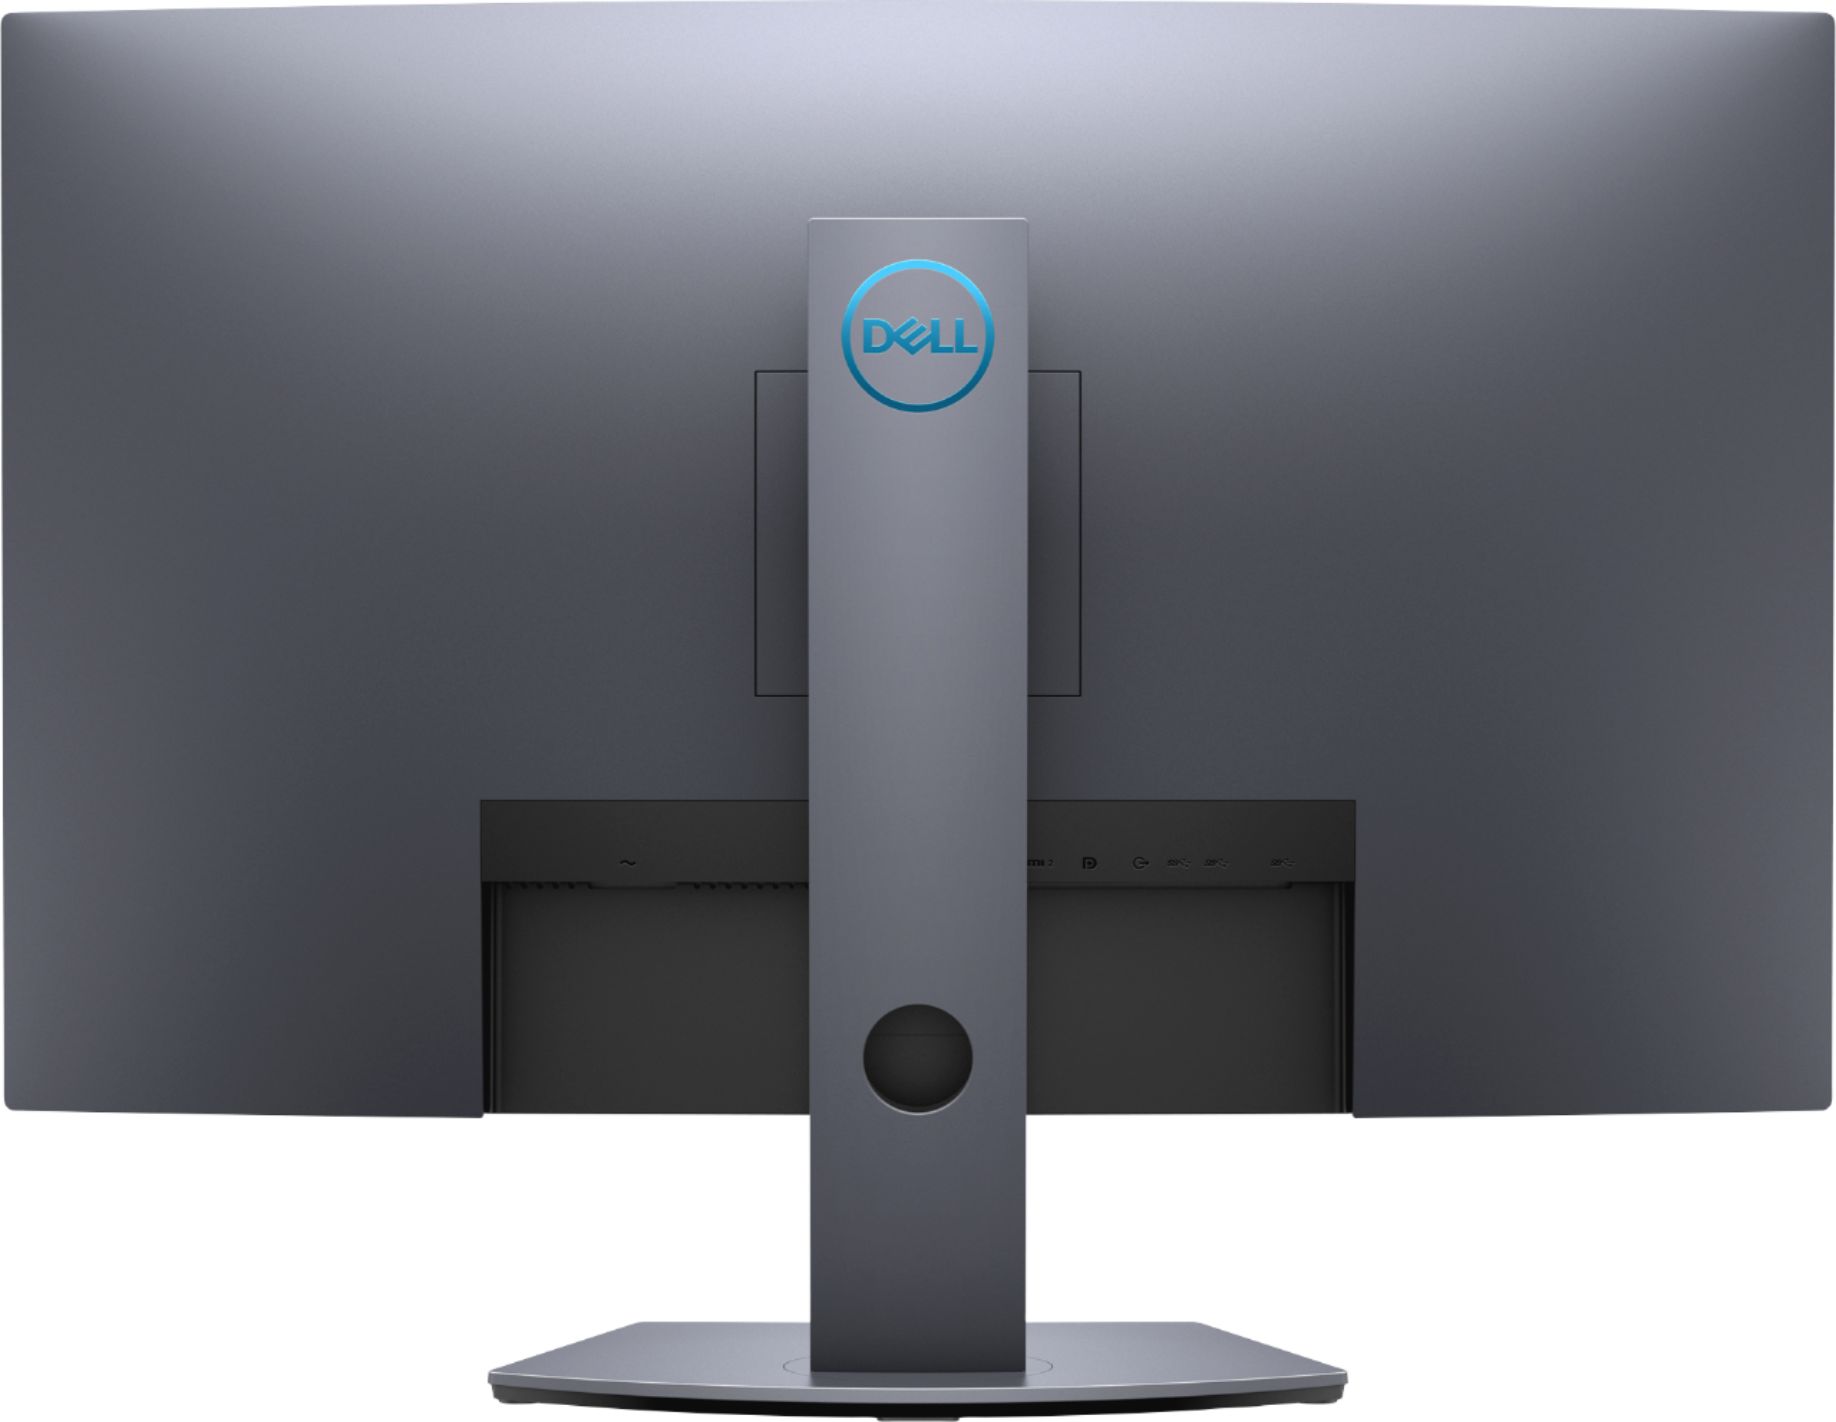 Back View: Dell - Geek Squad Certified Refurbished 32" LED Curved QHD FreeSync Monitor with HDR